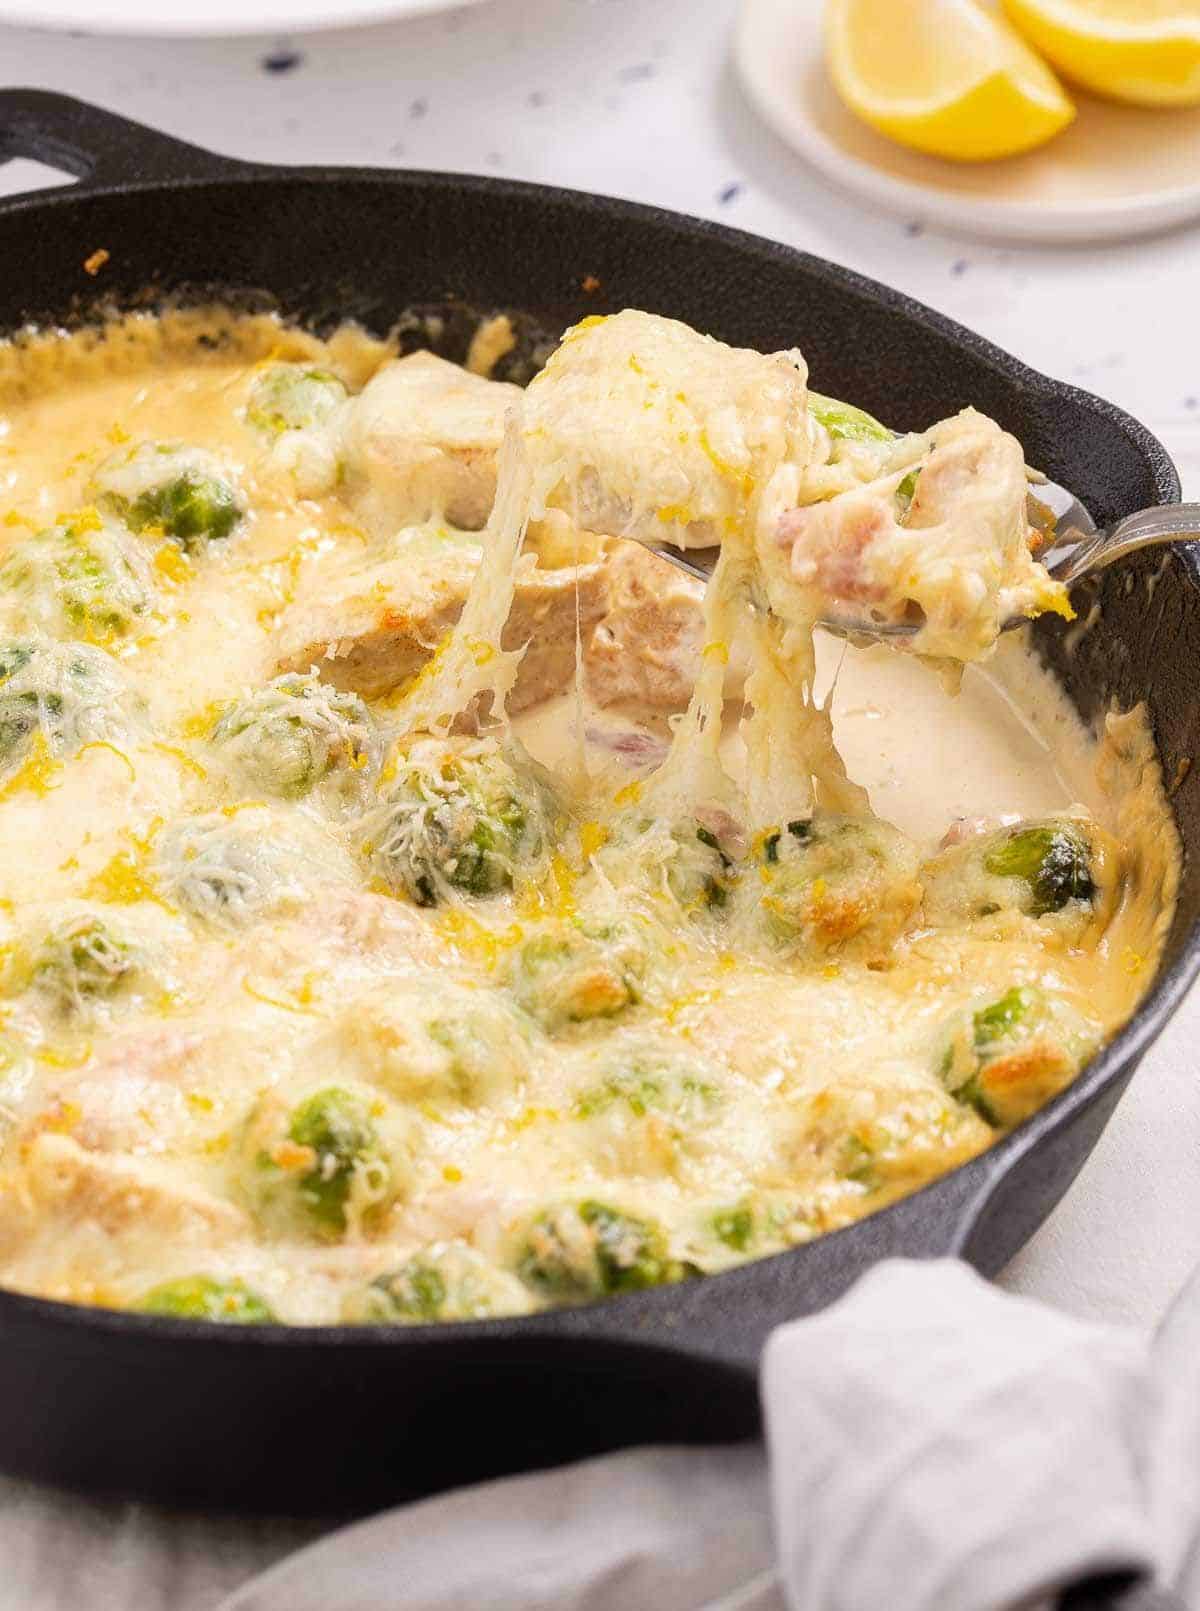 Brussels Sprouts Bacon Chicken in Parmesan Sauce in a black skillet.